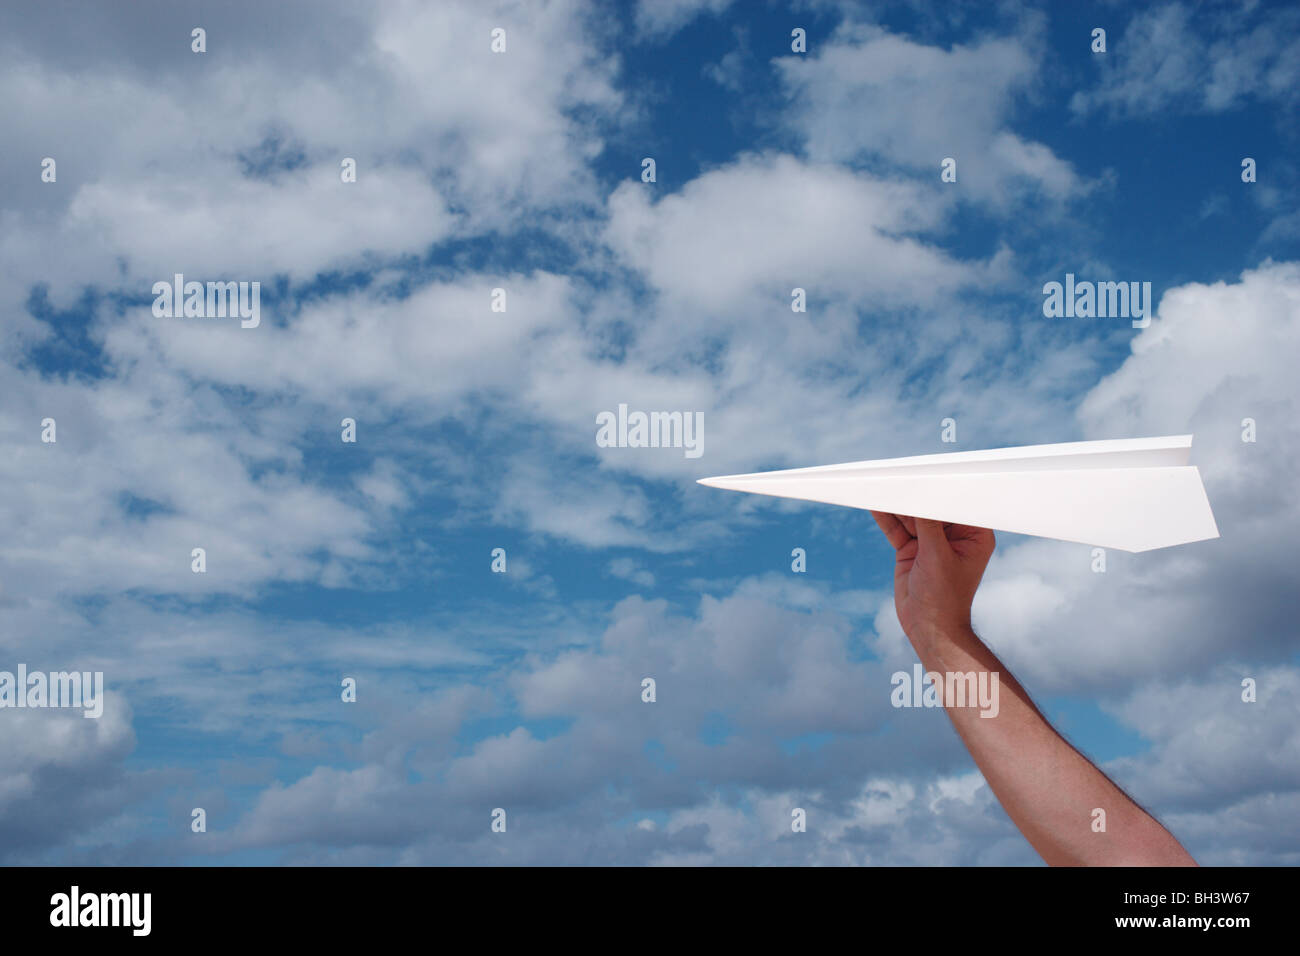 A man's hand holding a white paper airplane in a blue cloudy sky Stock Photo